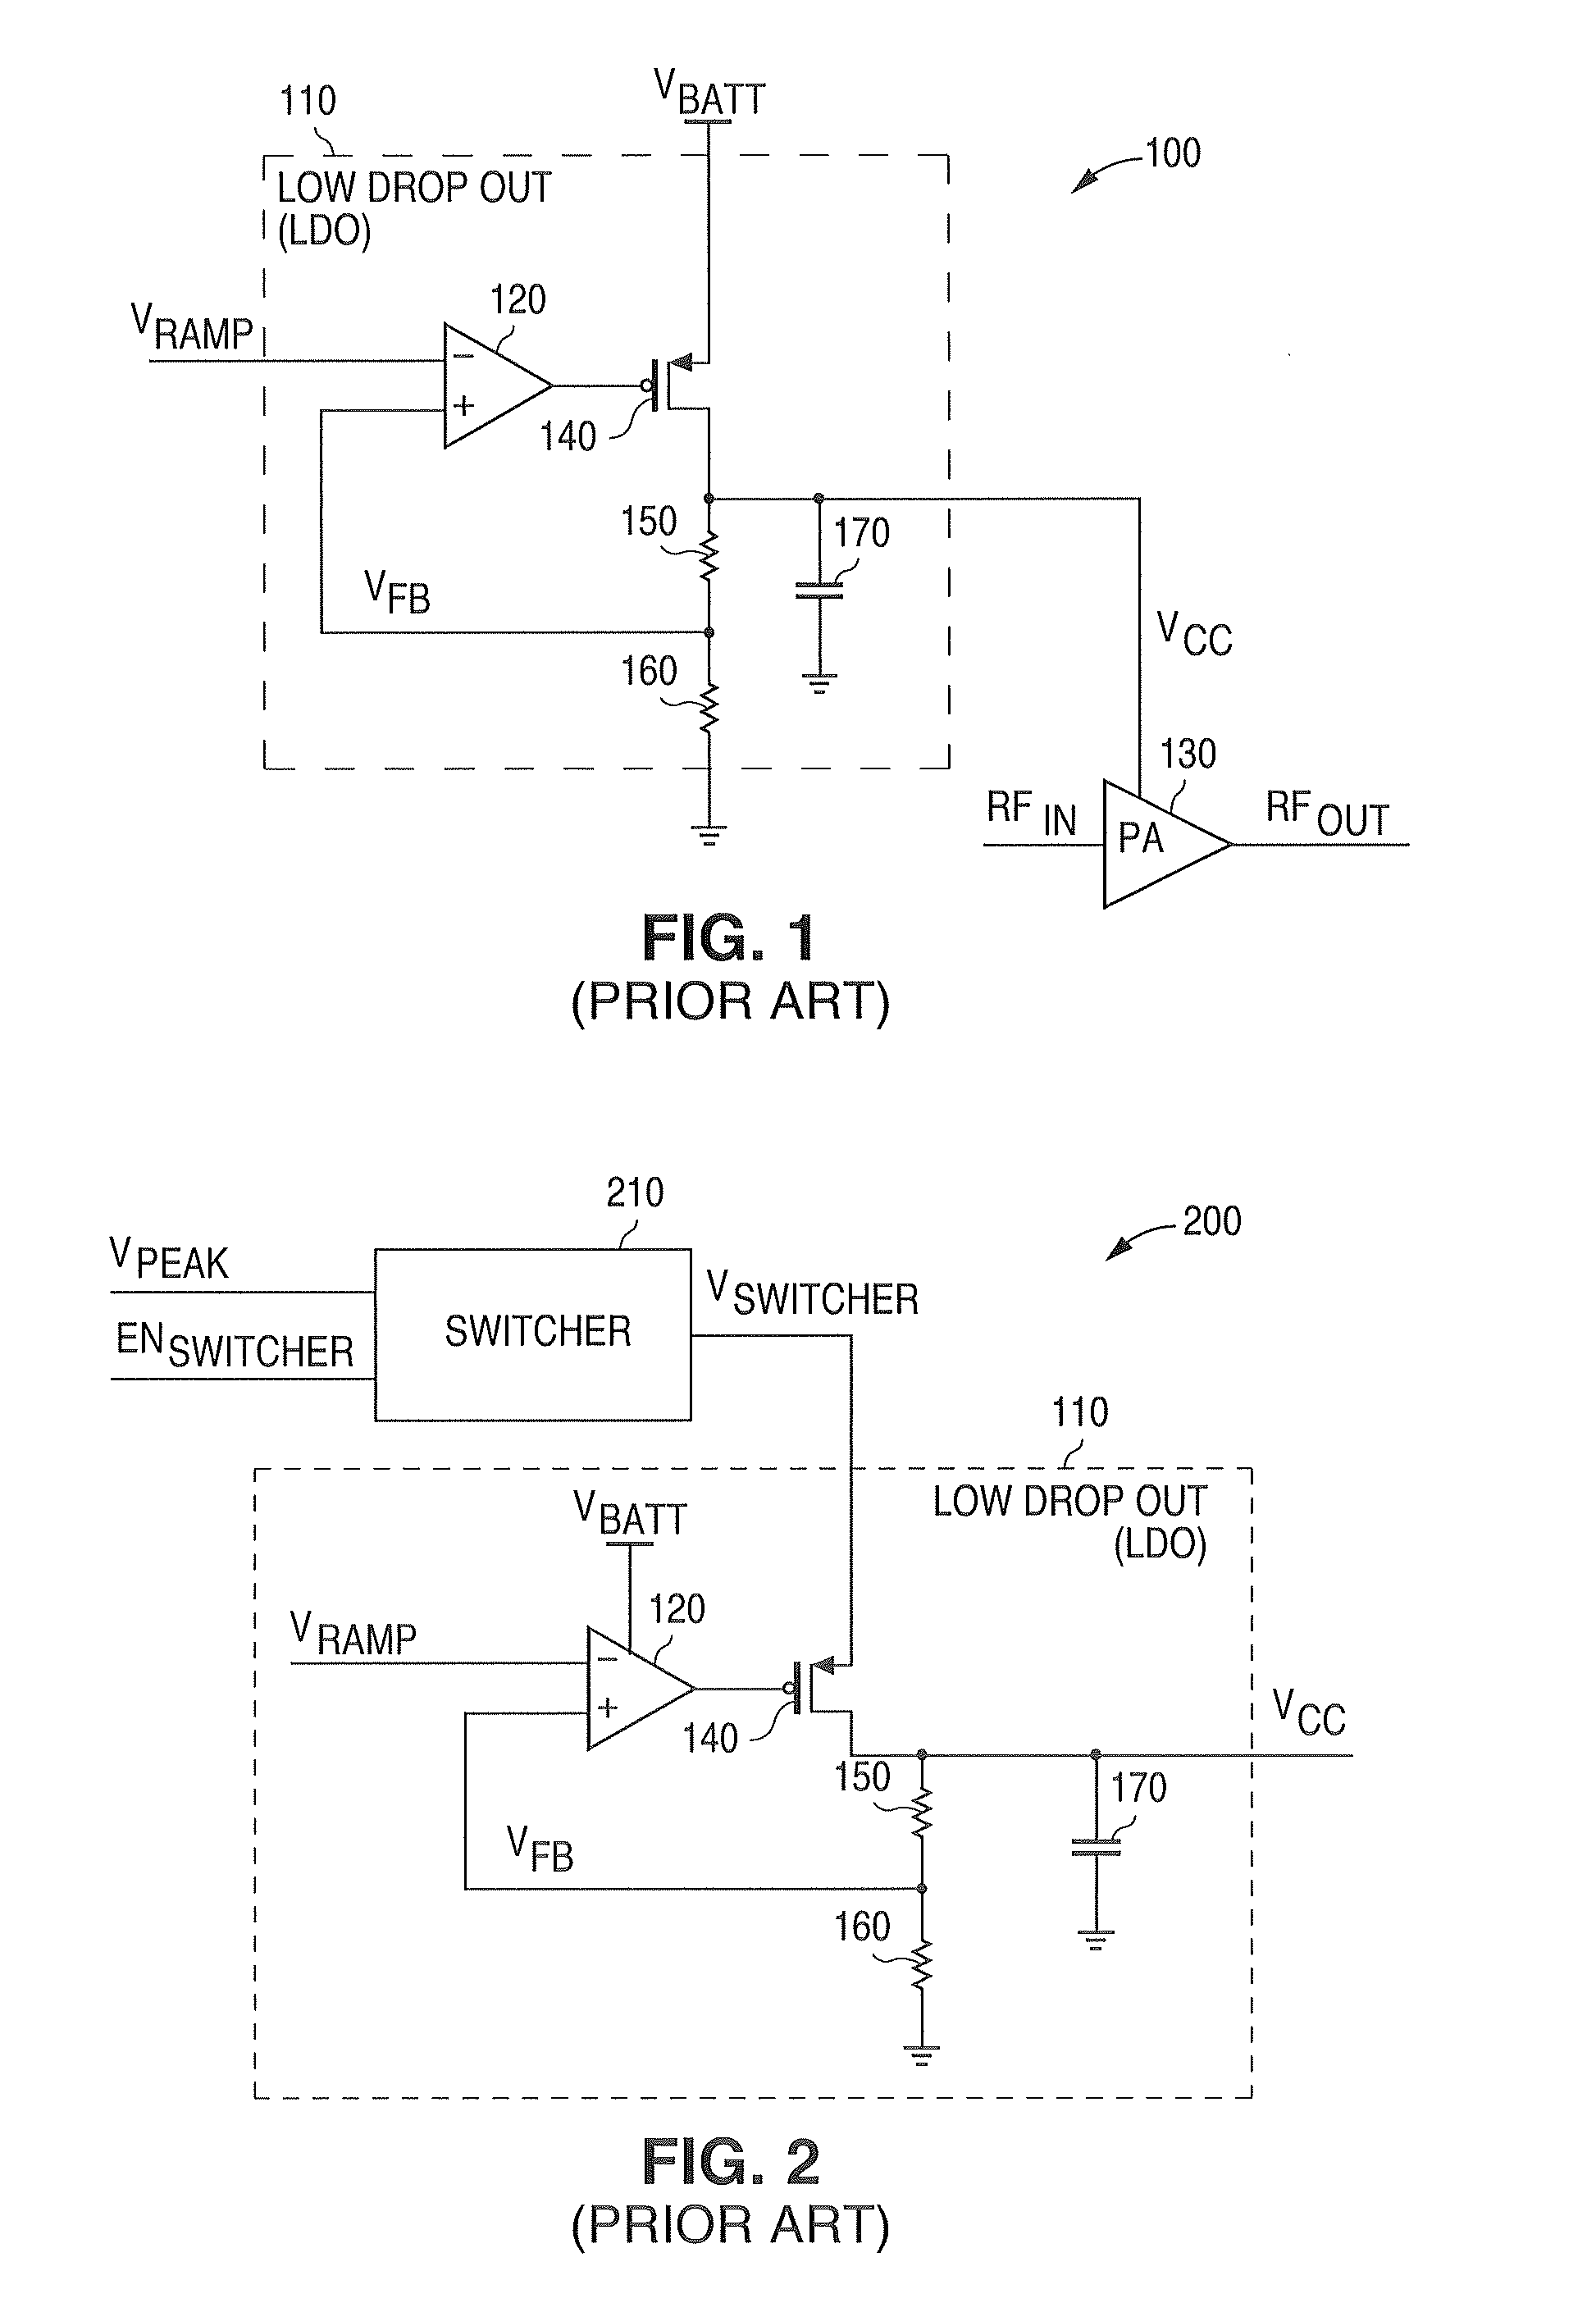 System and method for providing a dynamically configured low drop out regulator with zero quiescent current and fast transient response